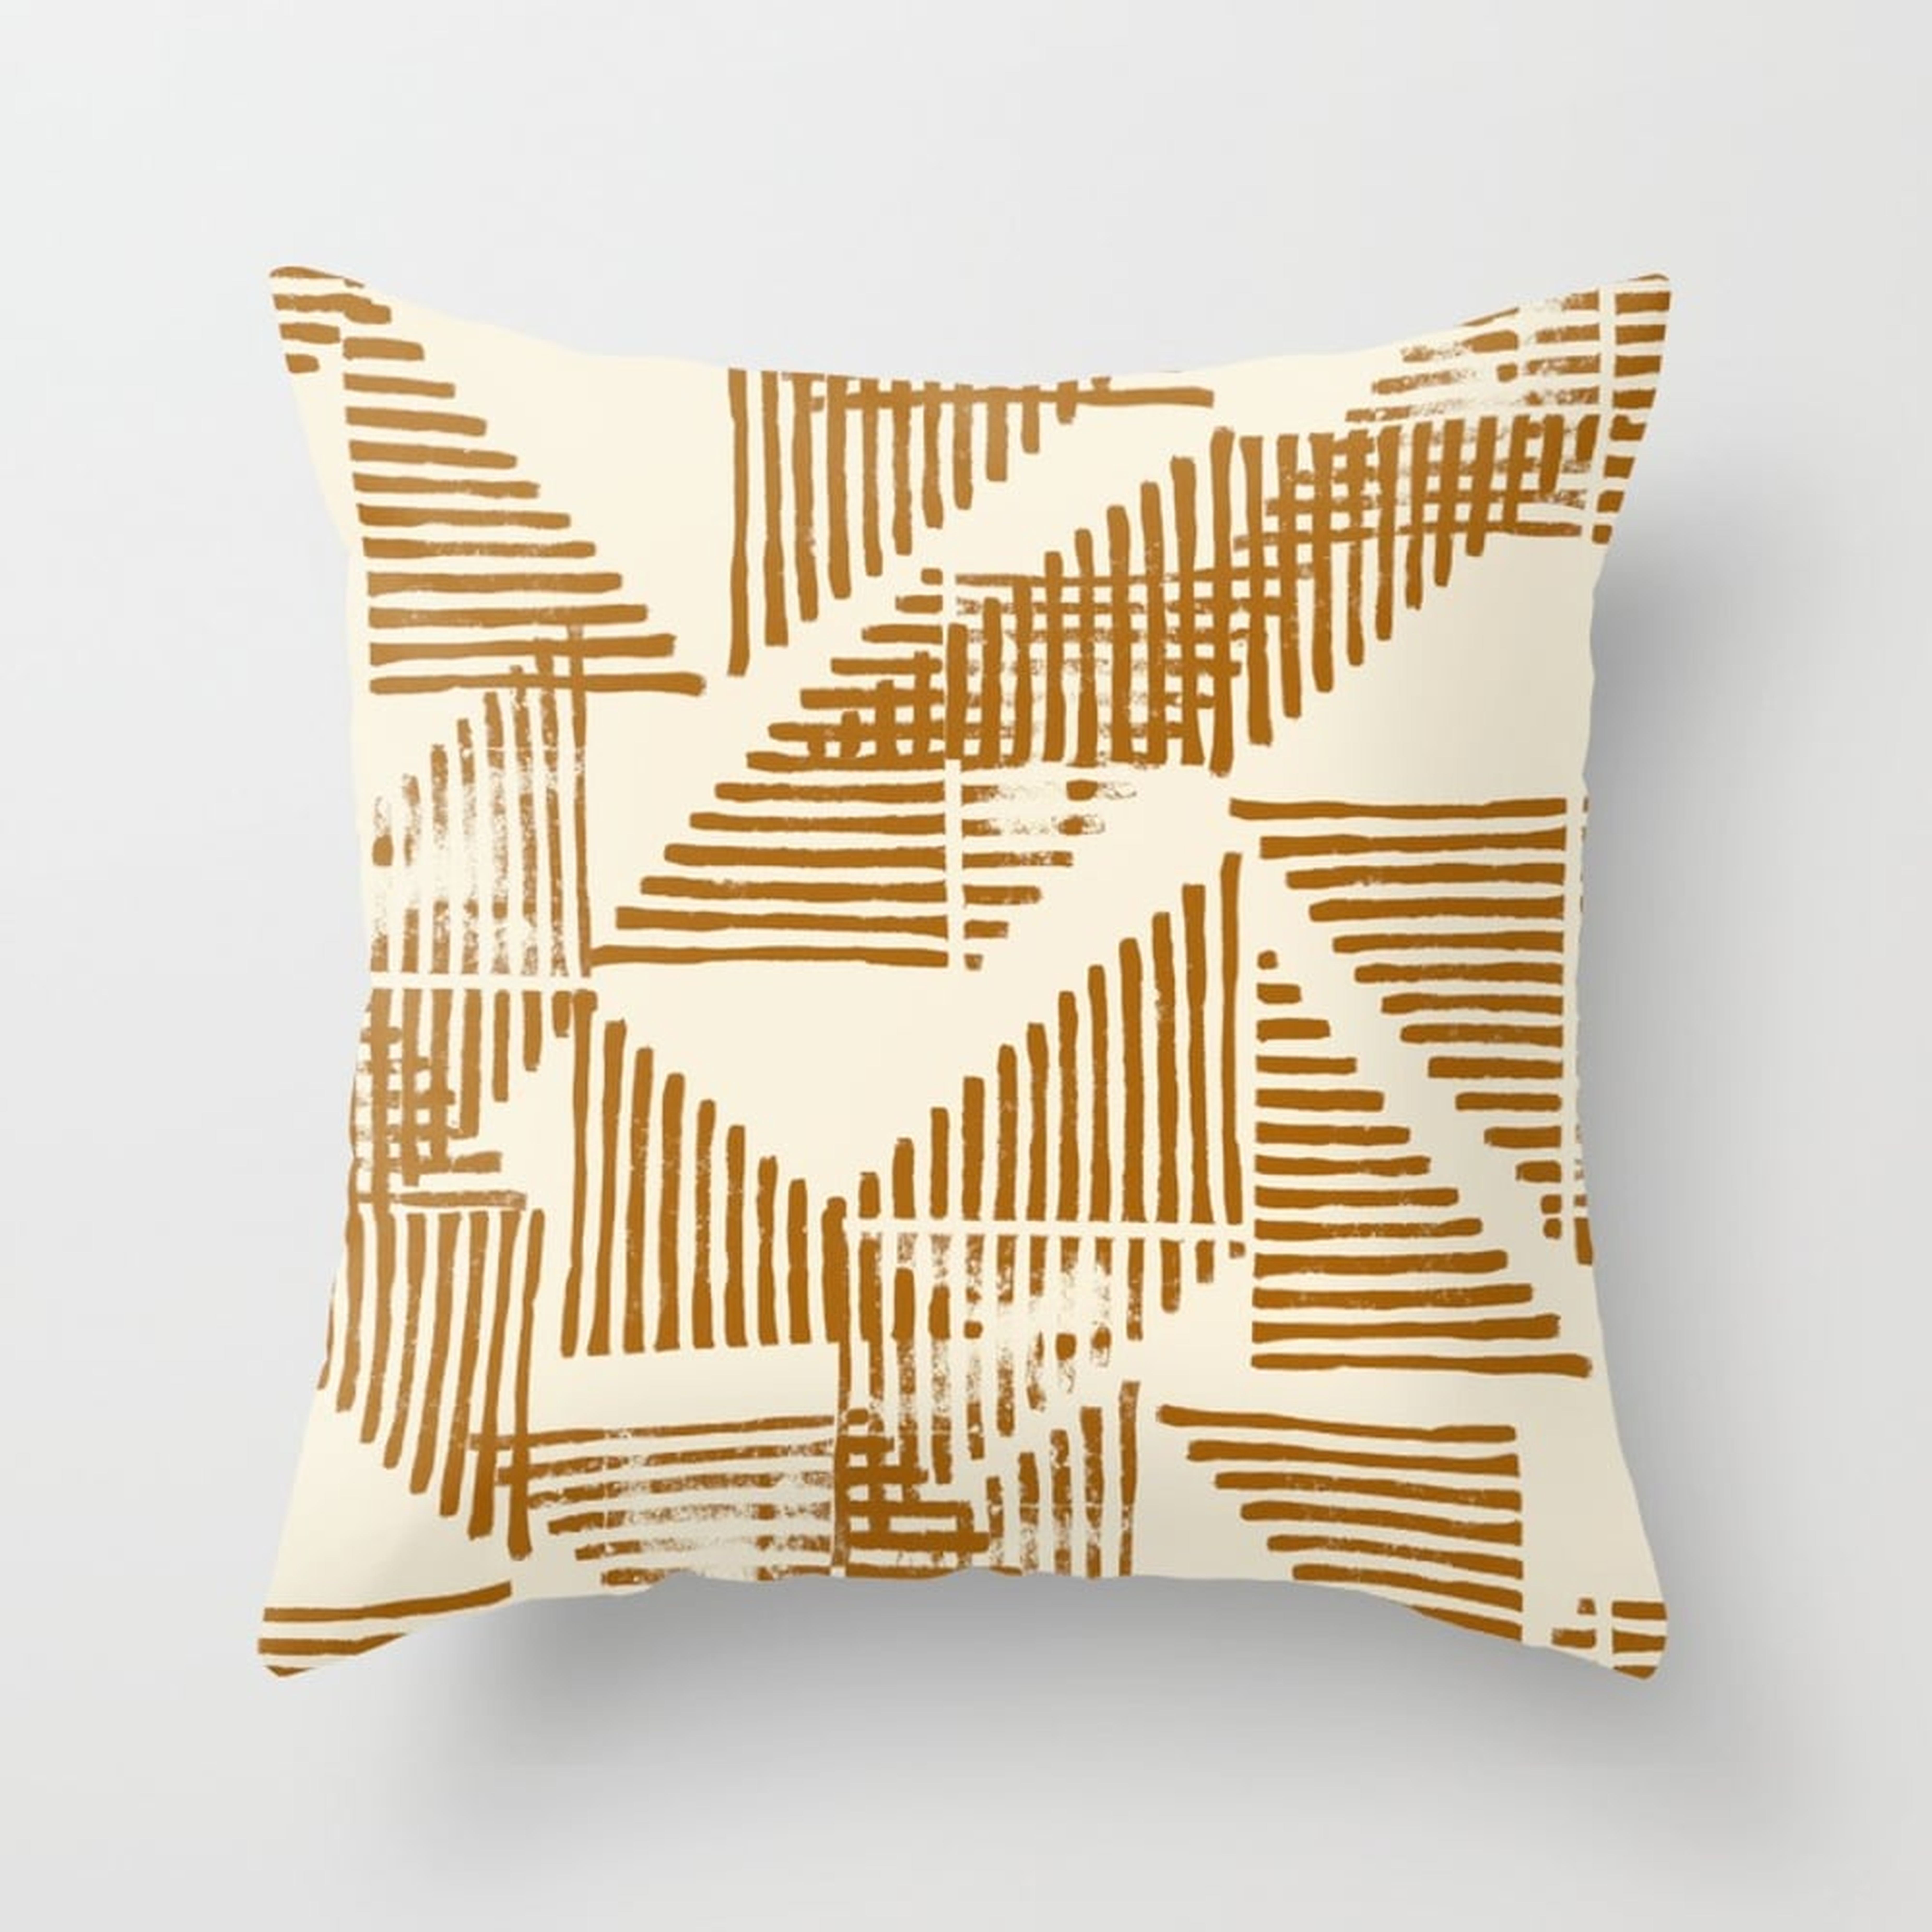 Stripe Triangle Block Print Geometric Pattern in Orange Throw Pillow - Indoor Cover (20" x 20") with pillow insert by Beckybailey1 - Society6